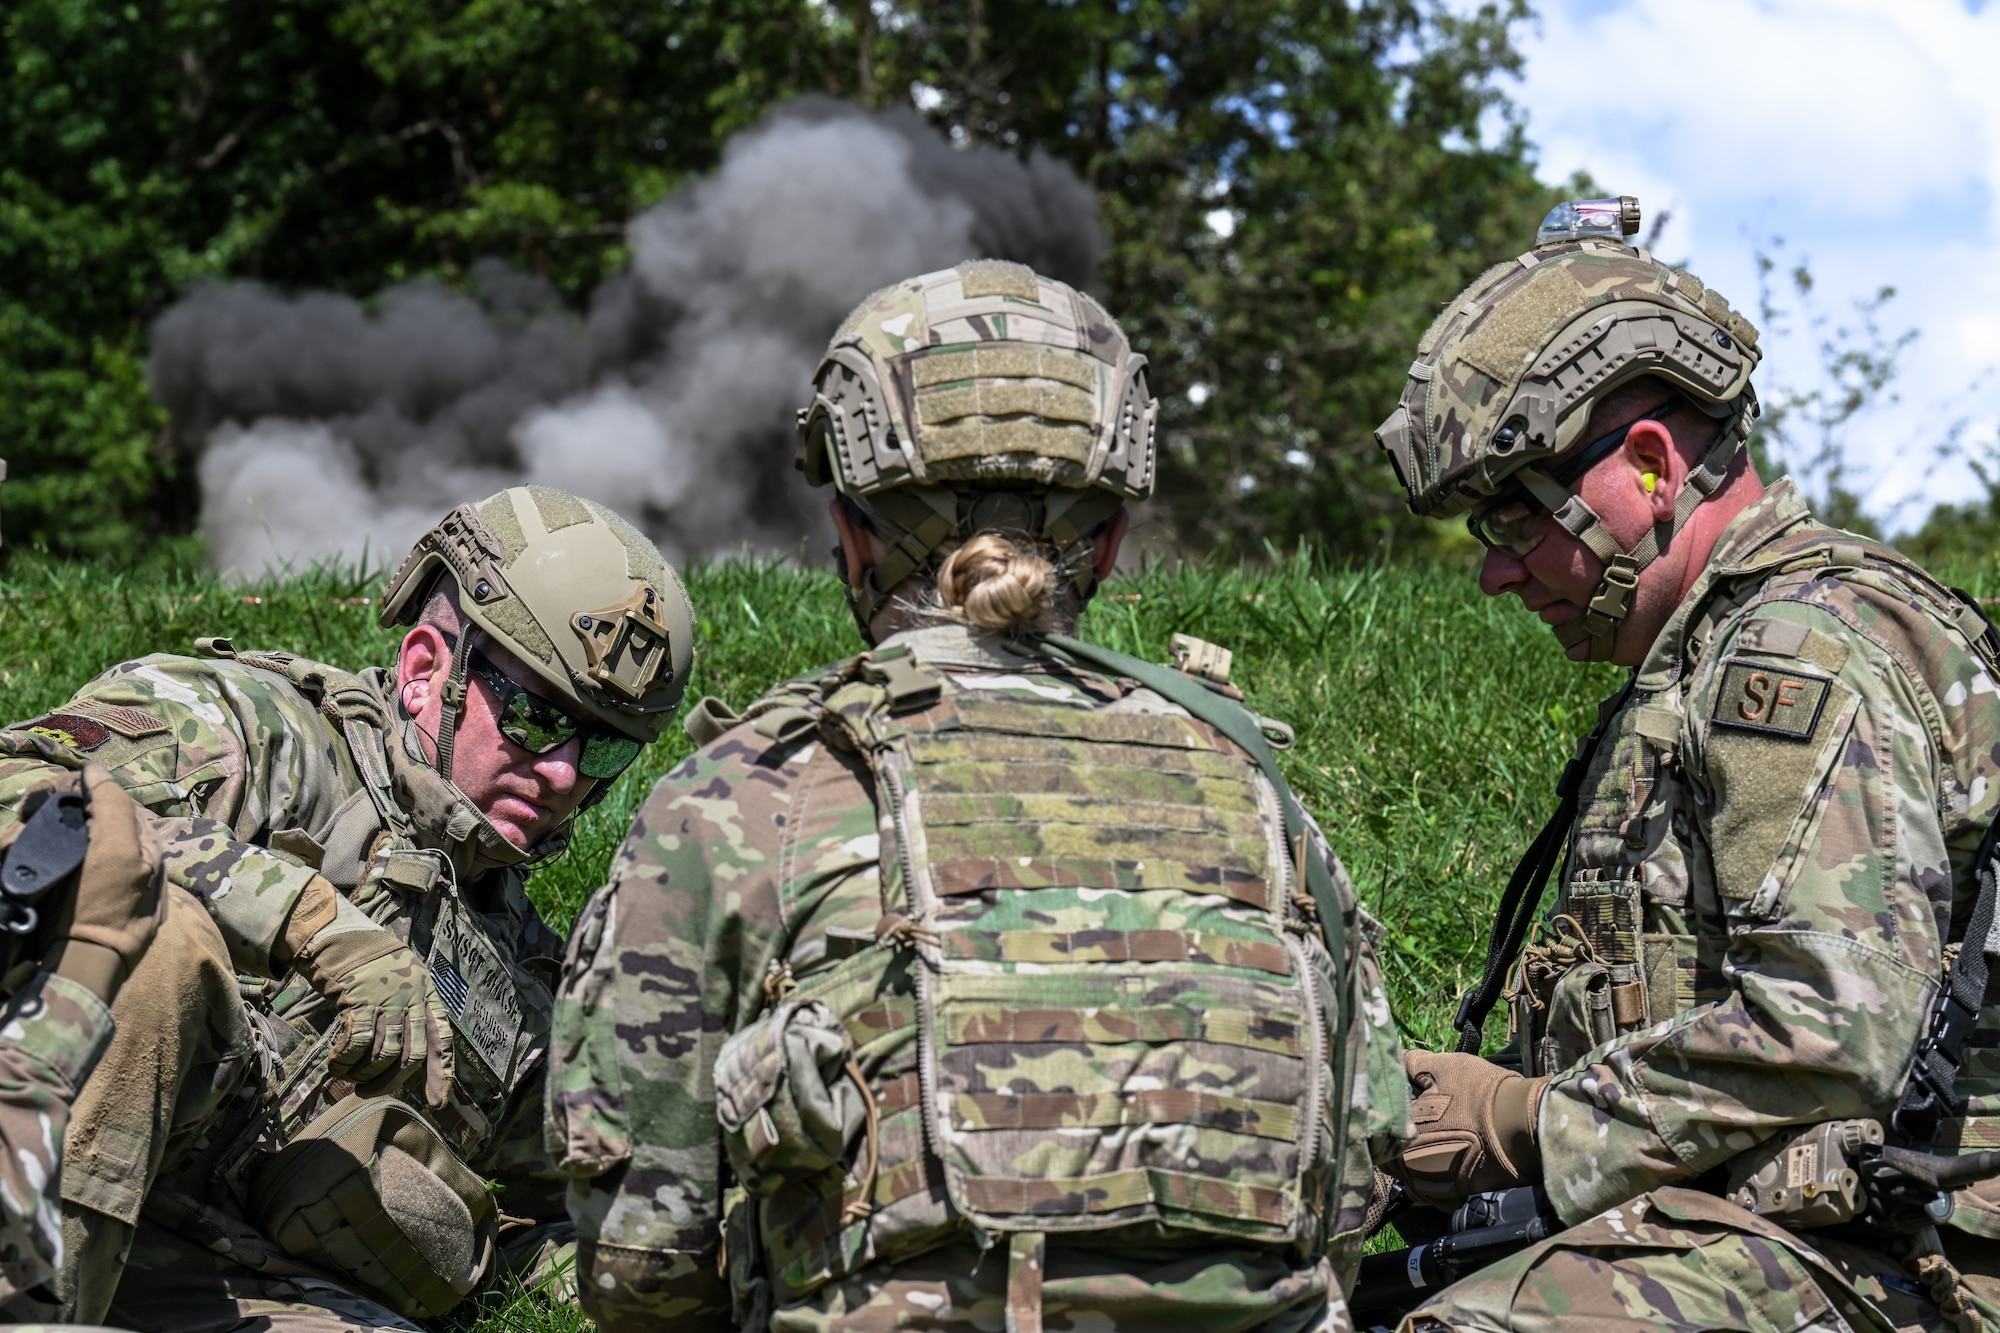 Senior Master Sgt. Daniel Chase, Integrated Defense Leadership Course chief assigned to the 310th Security Forces Squadron, Schriever Space Force Base, Colorado, oversees the detonation of a claymore by IDLC students on Aug. 15, 2023, at Camp James A. Garfield Joint Military Training Center, Ohio.